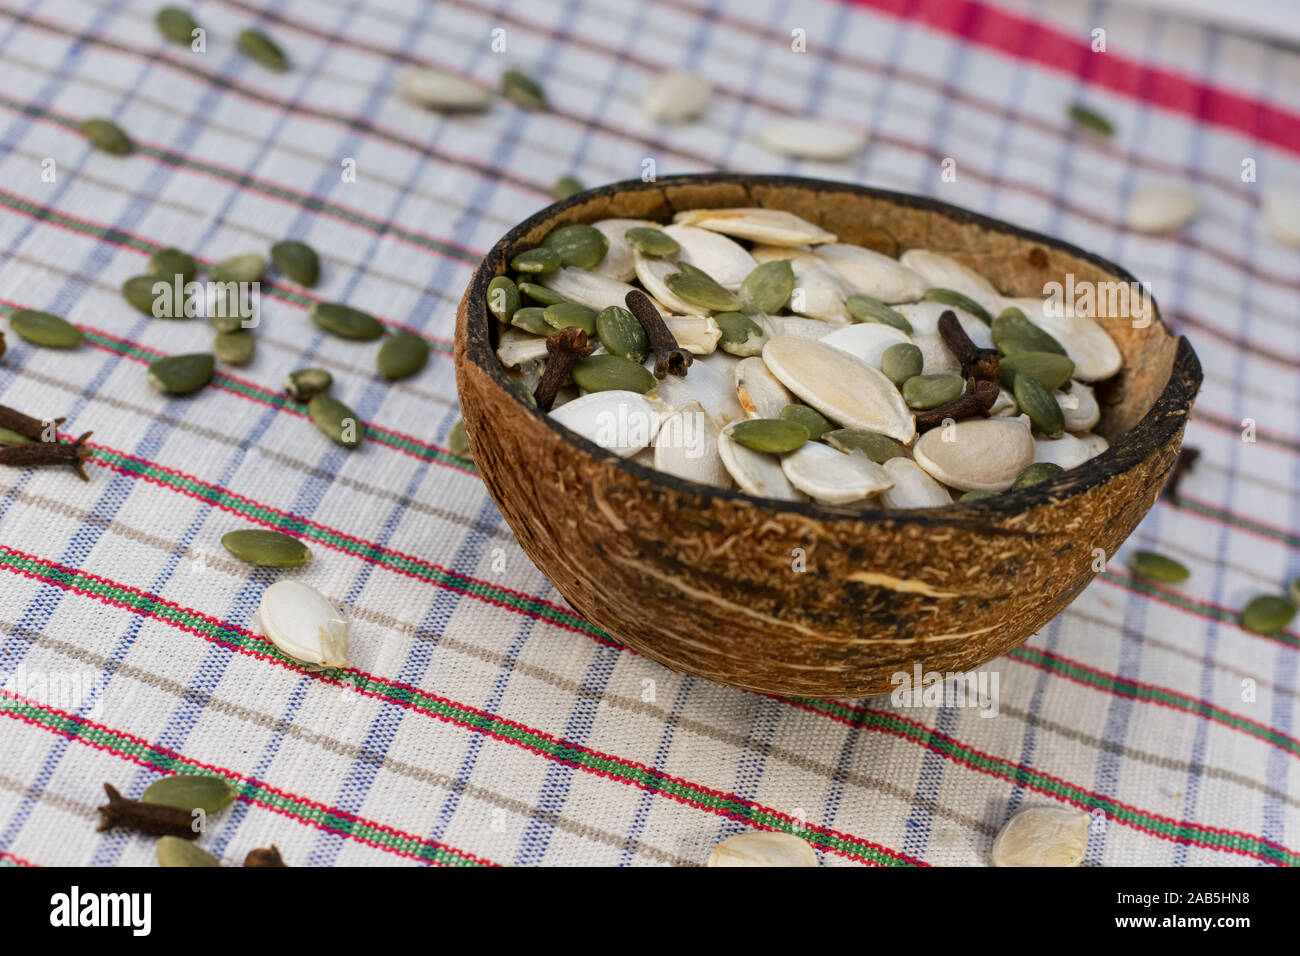 Coconut bowl full of peeled and unpeeled pumpkin seeds in white background with scattered pumpkin seeds and clove spice. Stock Photo